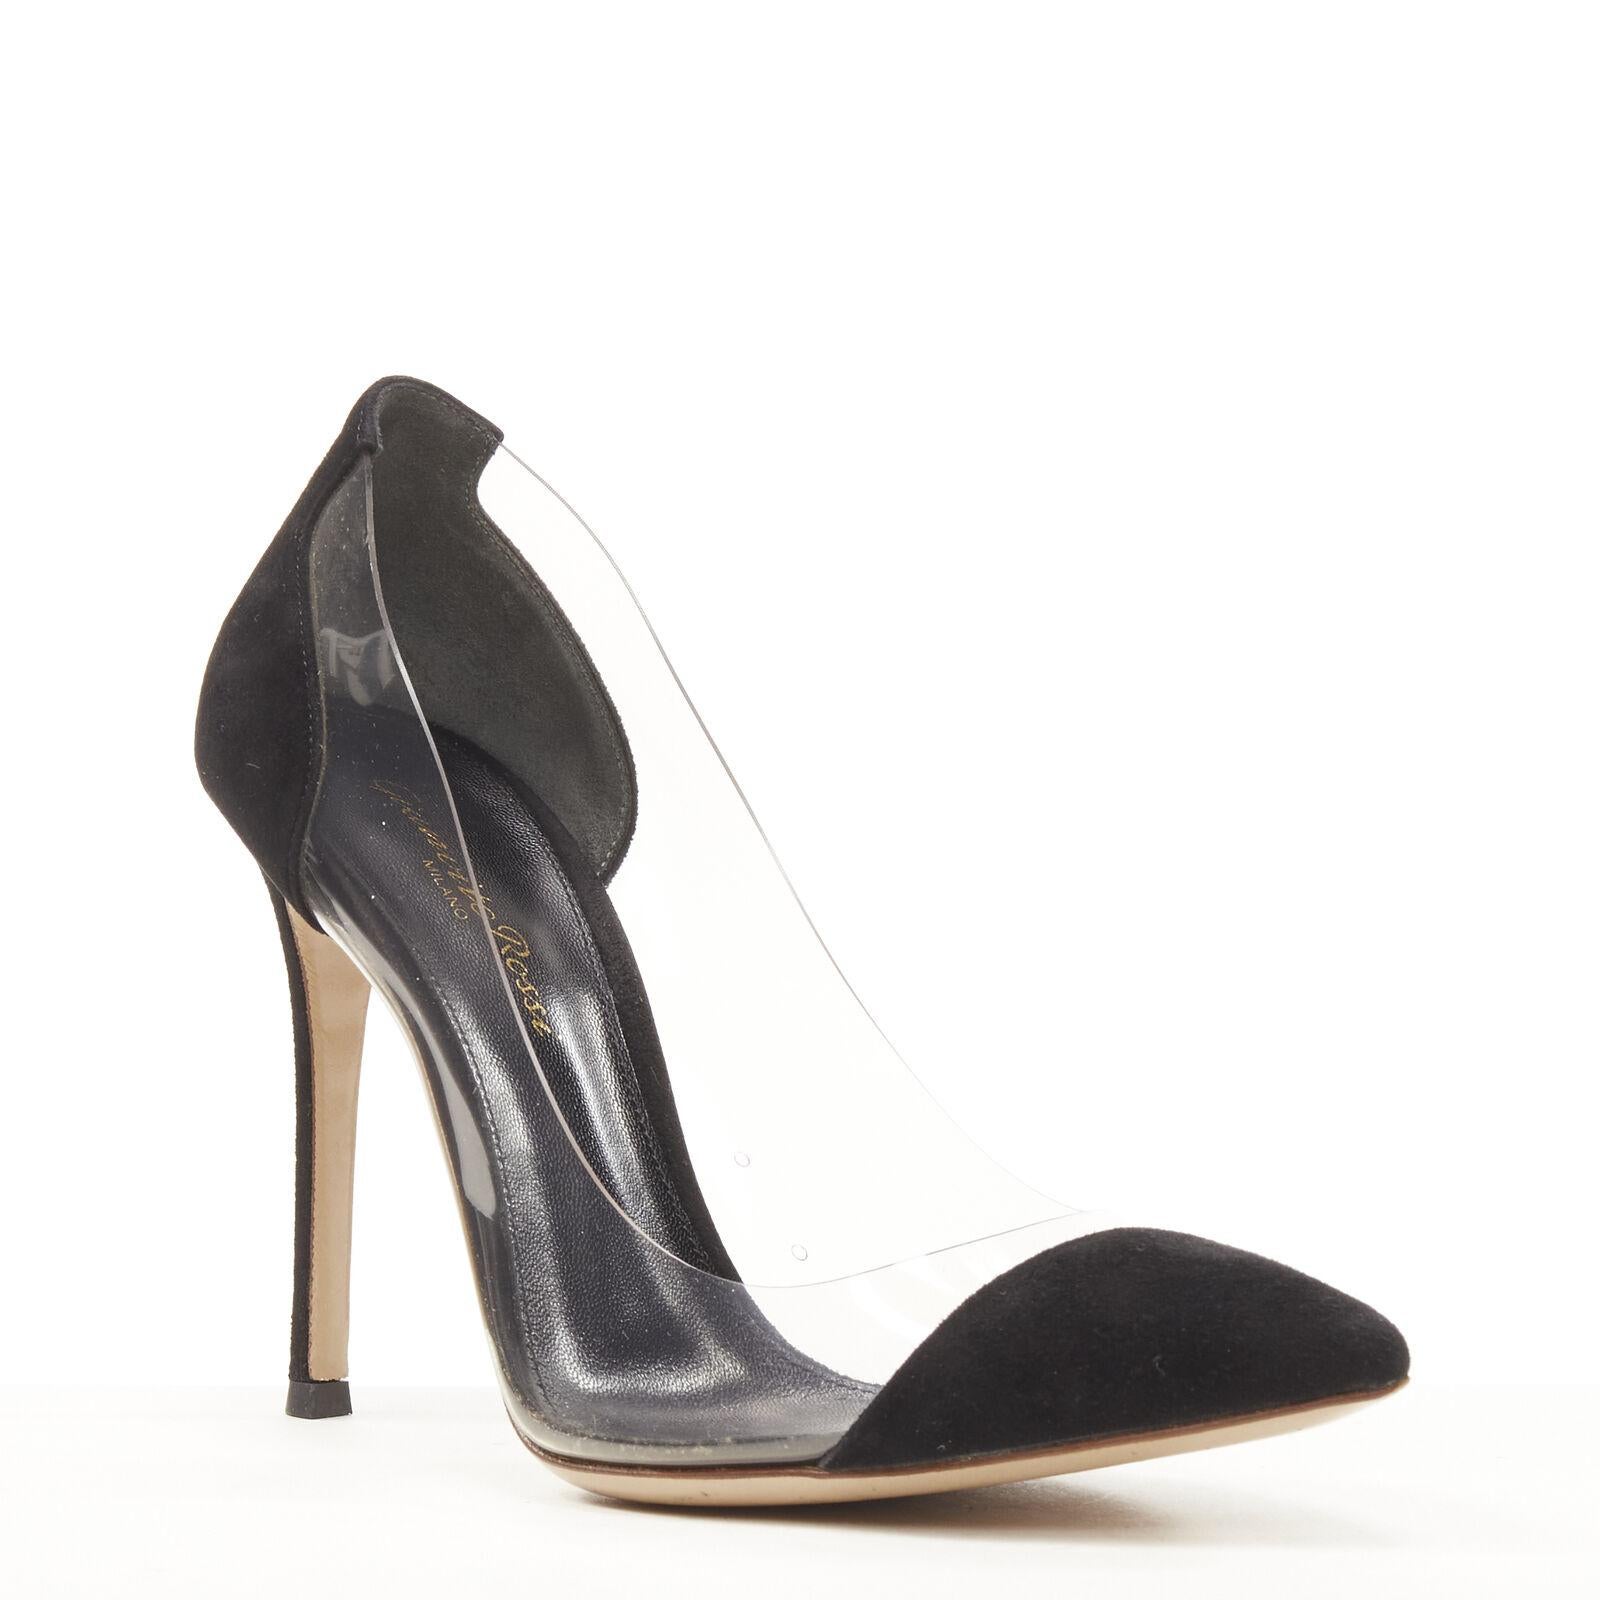 GIANVITO ROSSI Plexi black suede PVC pigalle pump EU37
Reference: SNKO/A00197
Brand: Gianvito Rossi
Model: Plexi
Material: PVC, Suede
Color: Black
Pattern: Solid
Lining: Leather
Made in: Italy

CONDITION:
Condition: Very good, this item was